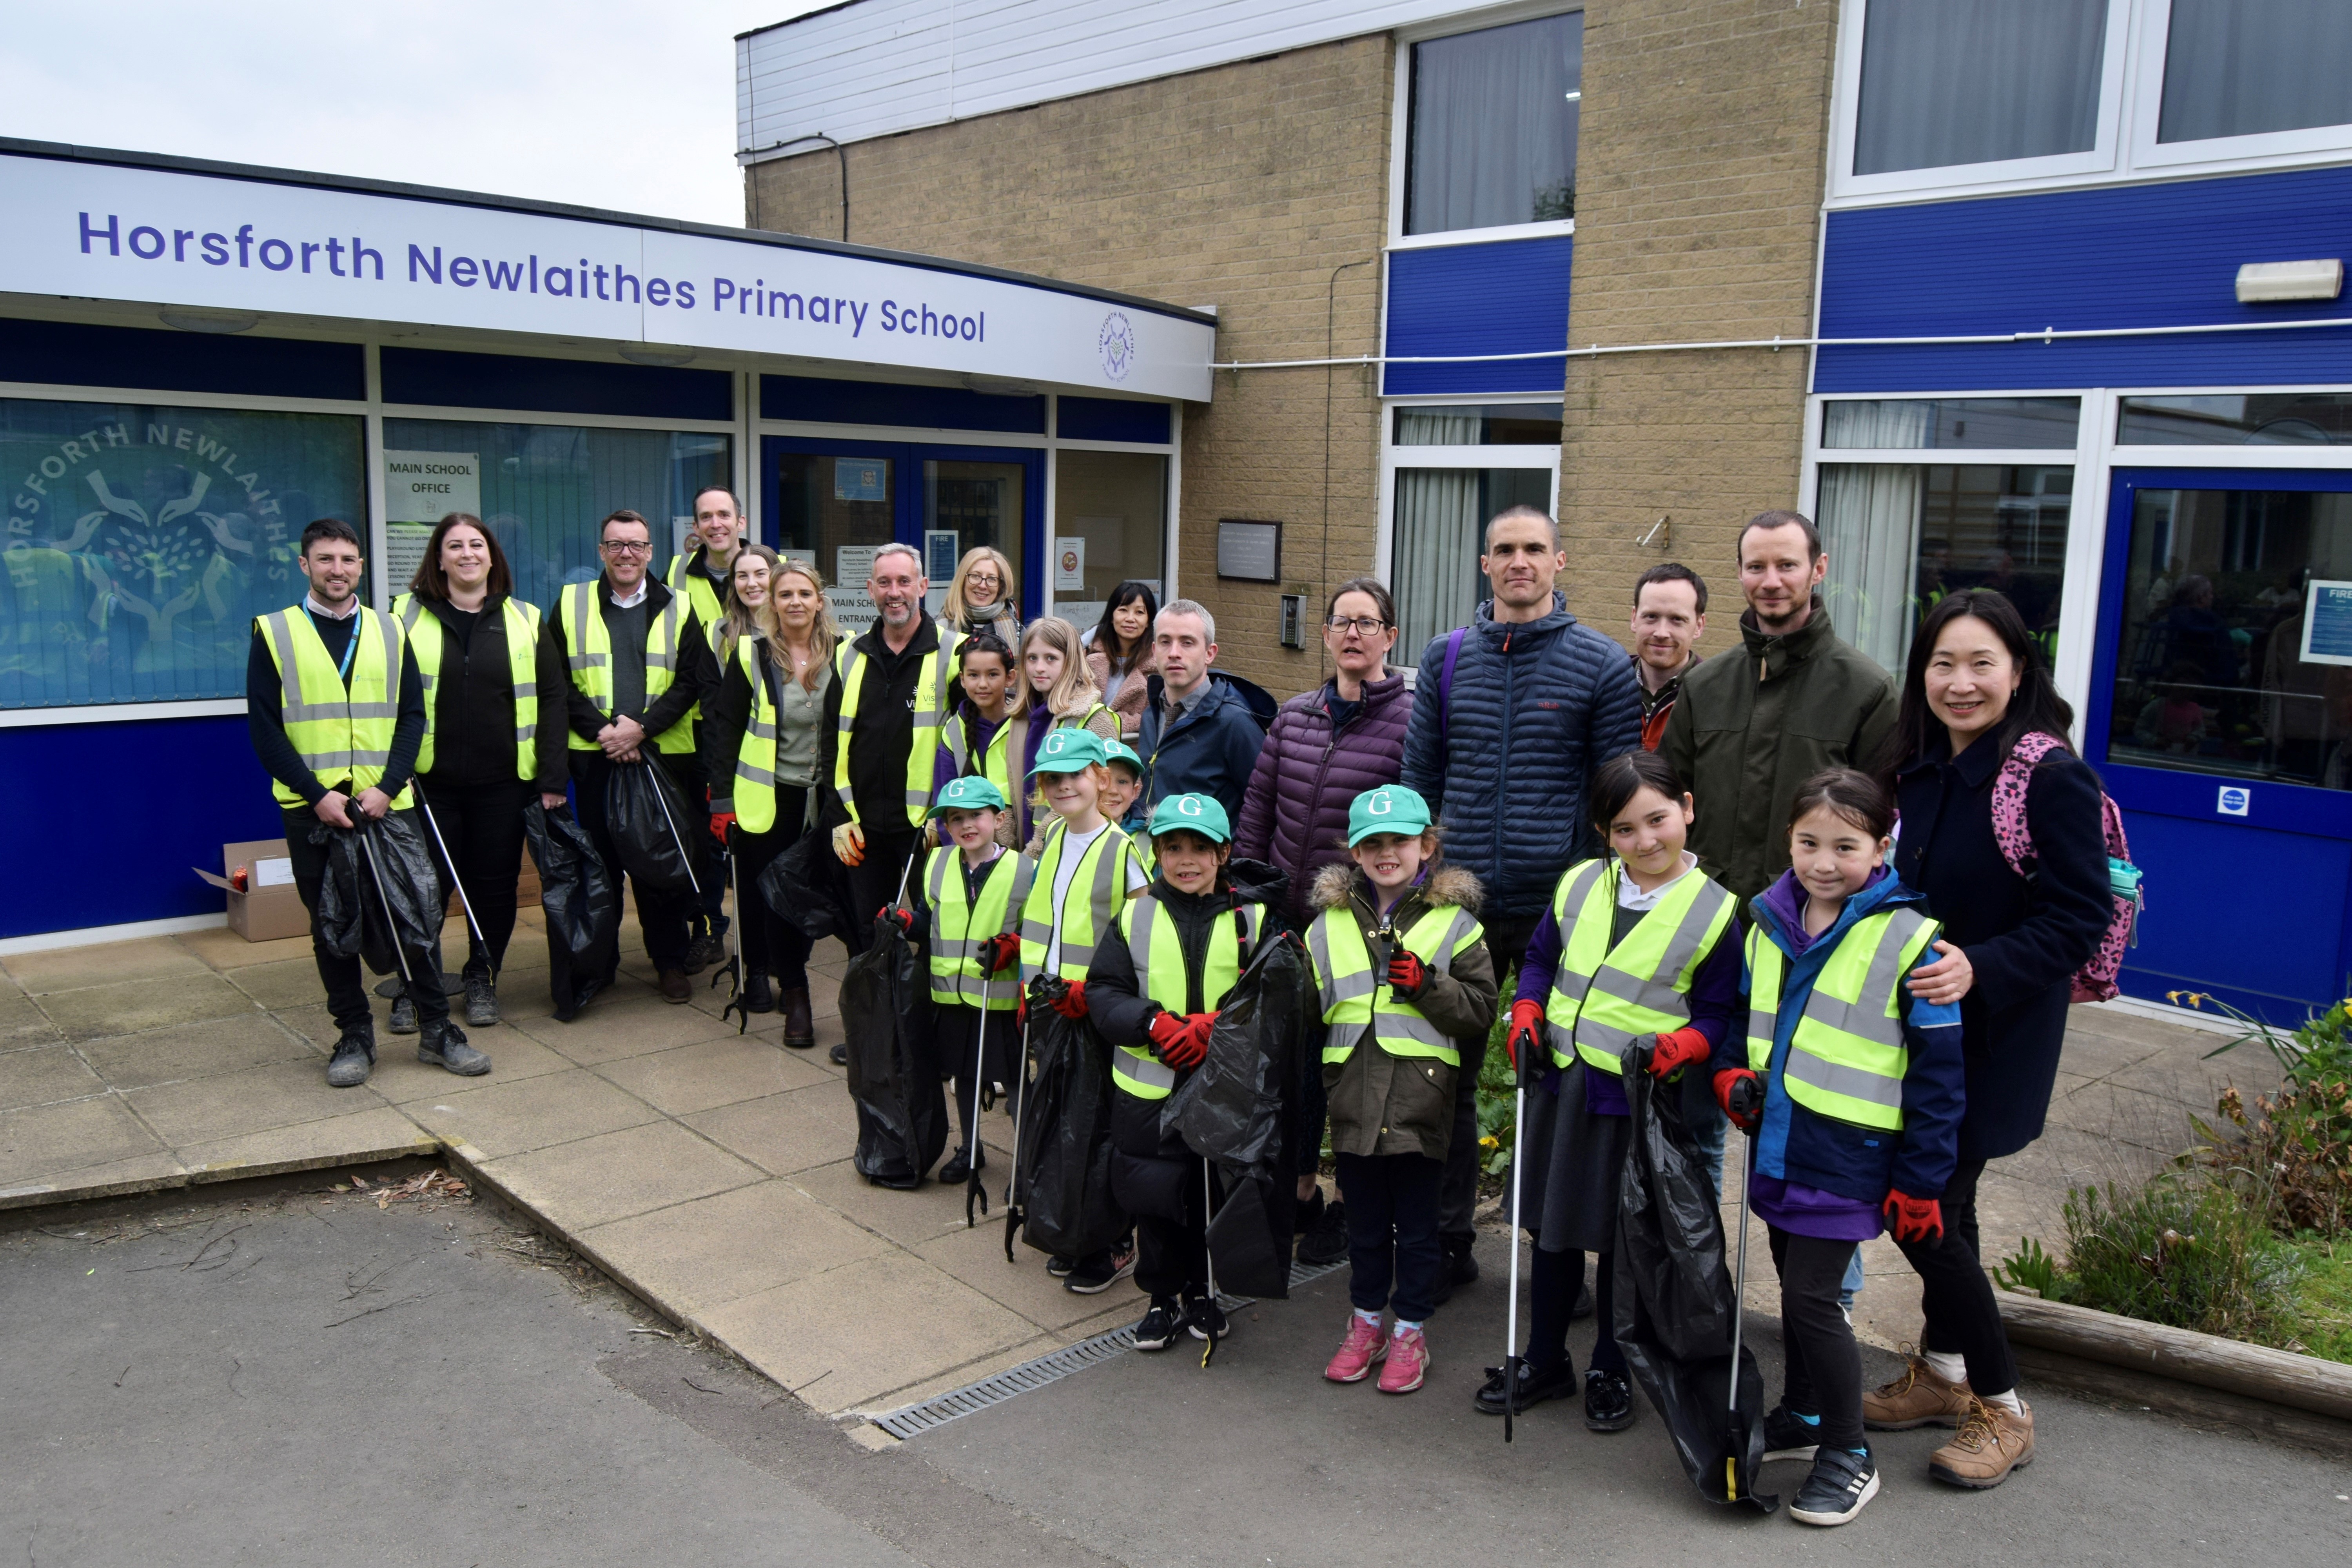 Group of Newlaithes school children and teachers with hi-vis jackets, holding litter pickers